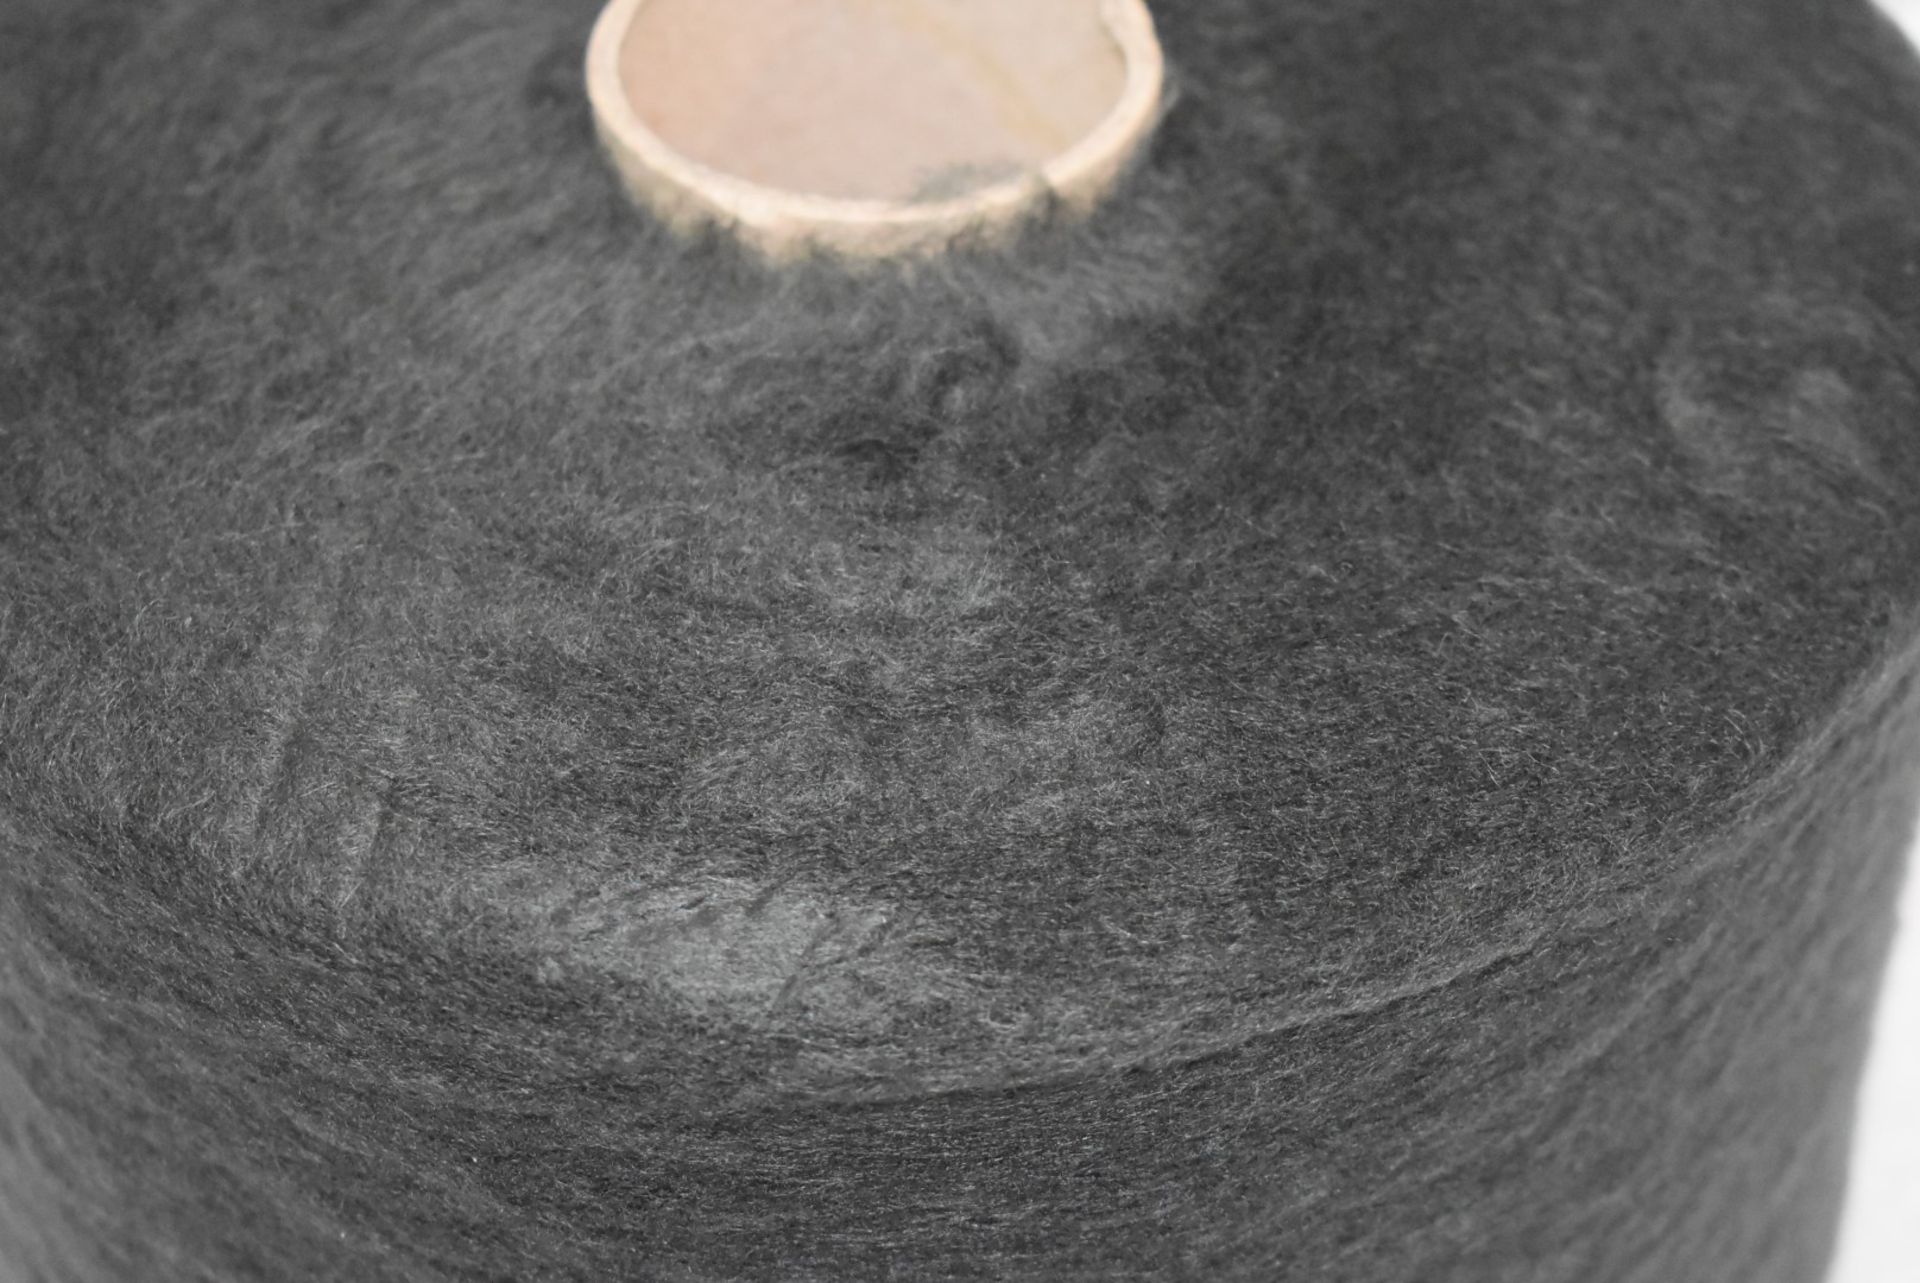 1 x Cone of 1/7,5 Lagona Knitting Yarn - Charcoal - Approx Weight: 2,300g - New Stock ABL Yarn - Image 7 of 10